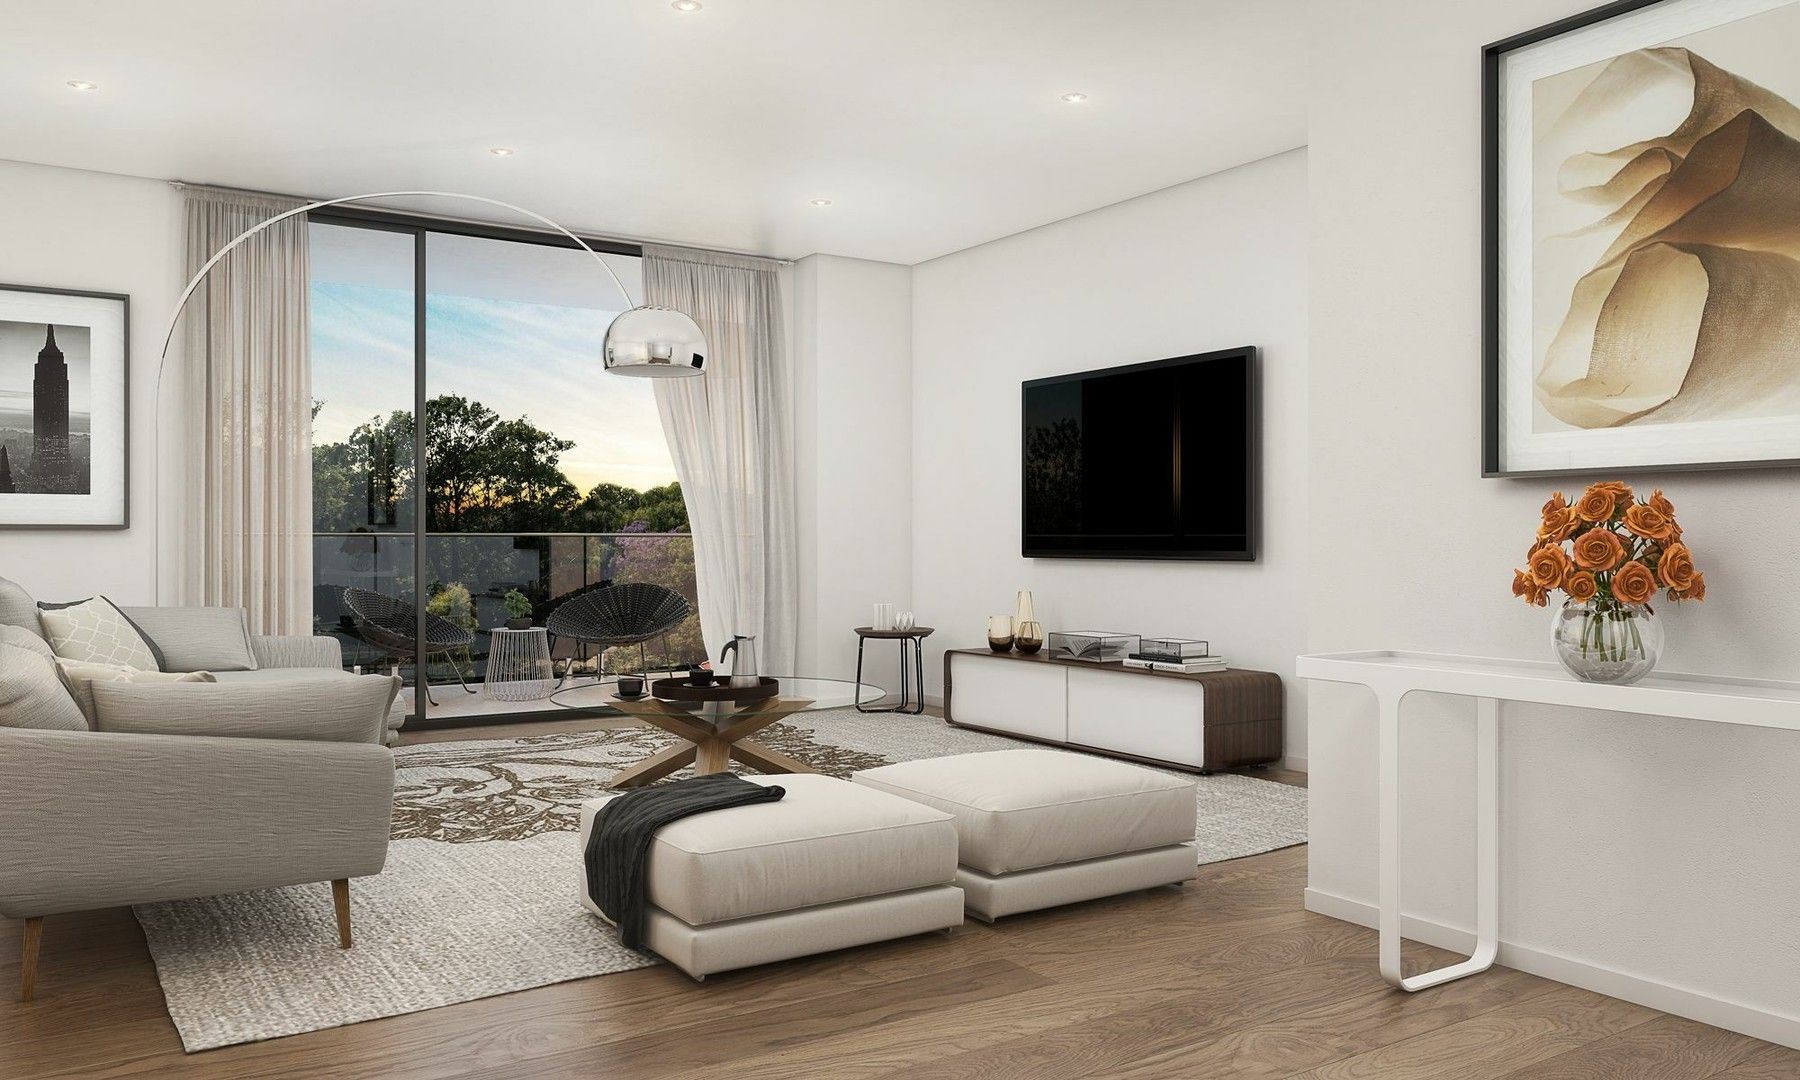 2 bedrooms New Apartments / Off the Plan in  ST MARYS NSW, 2760